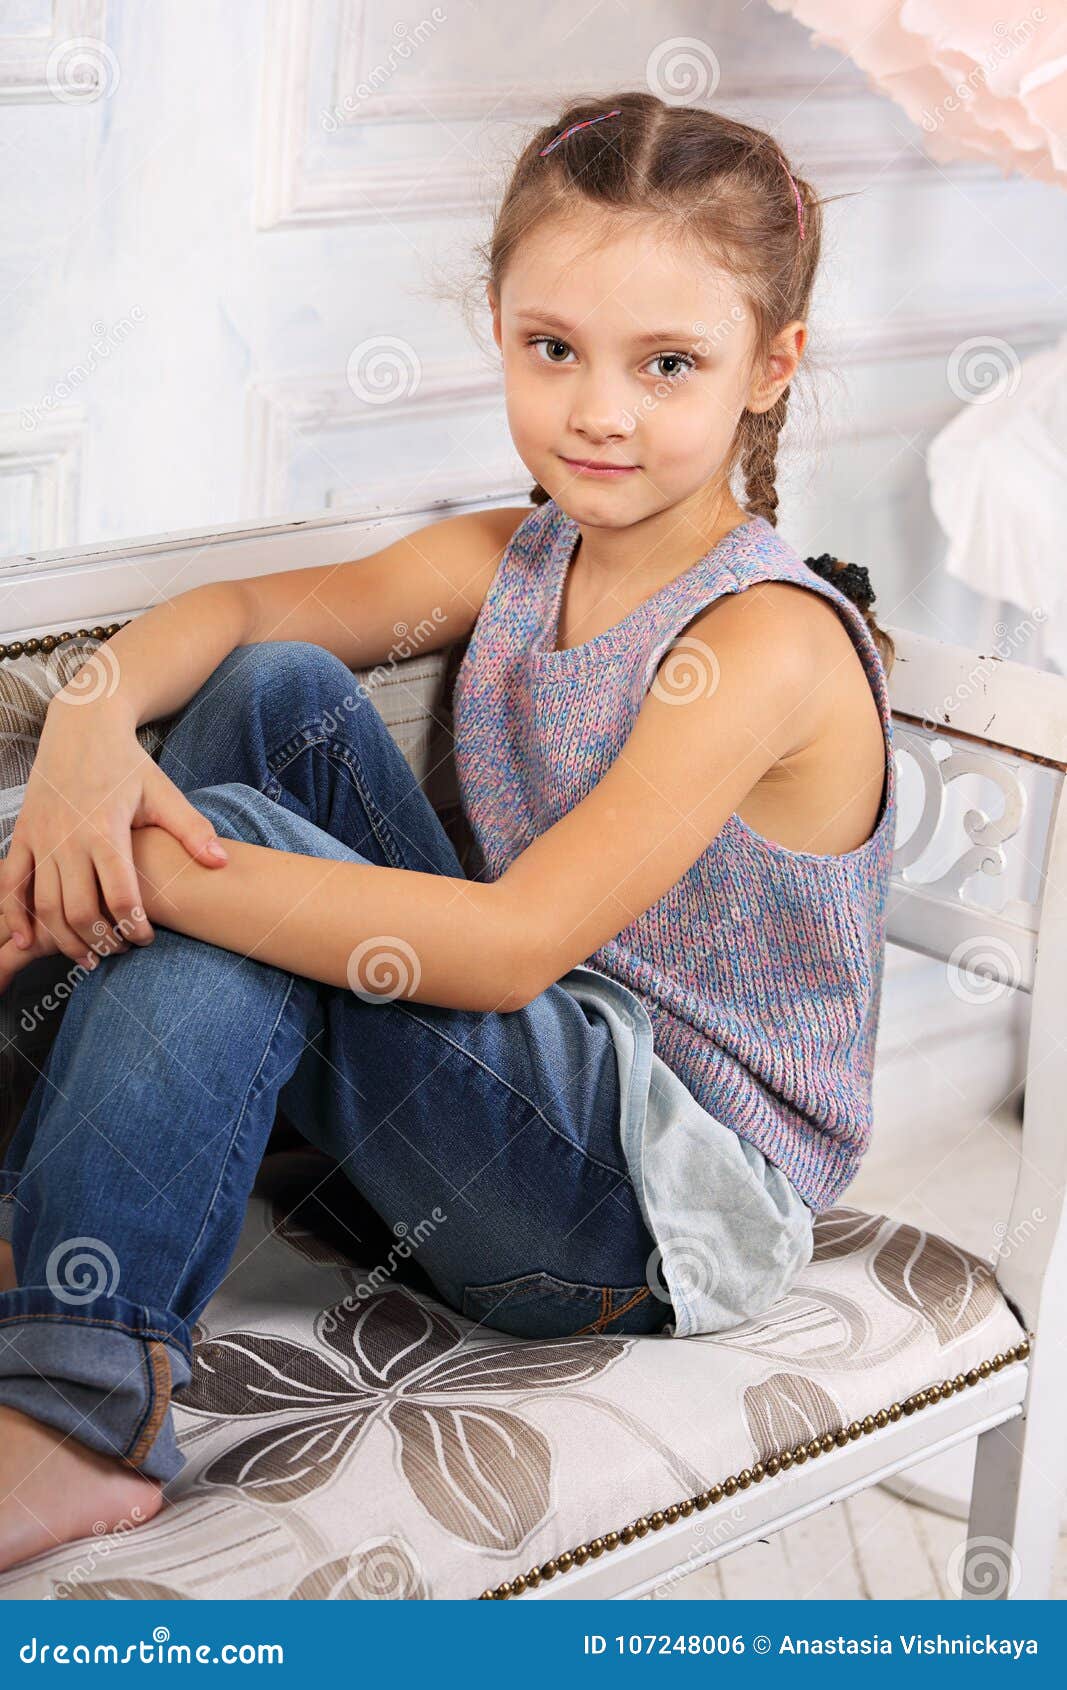 Beautiful Calm Smiling Kid Girl Sitting on the Bench in Blue Jeans and ...